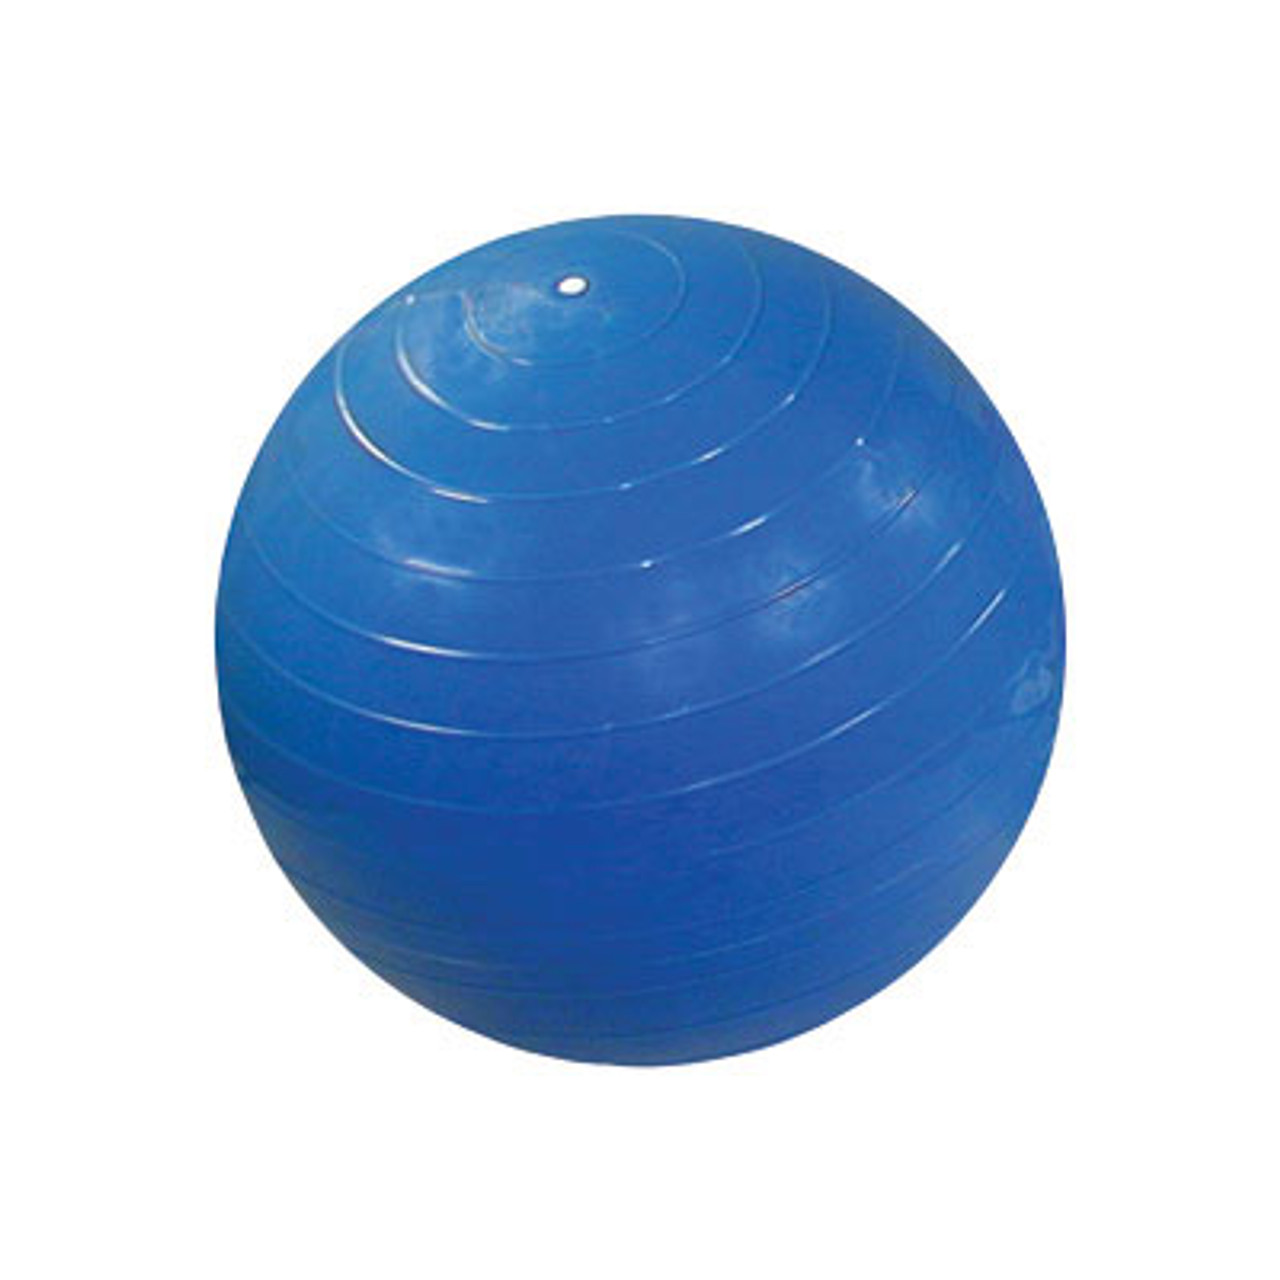 https://cdn11.bigcommerce.com/s-13ttxa/images/stencil/1280x1280/products/17363/17311/cando-42-inch-inflatable-exercise-ball-blue__83968.1704233600.jpg?c=2